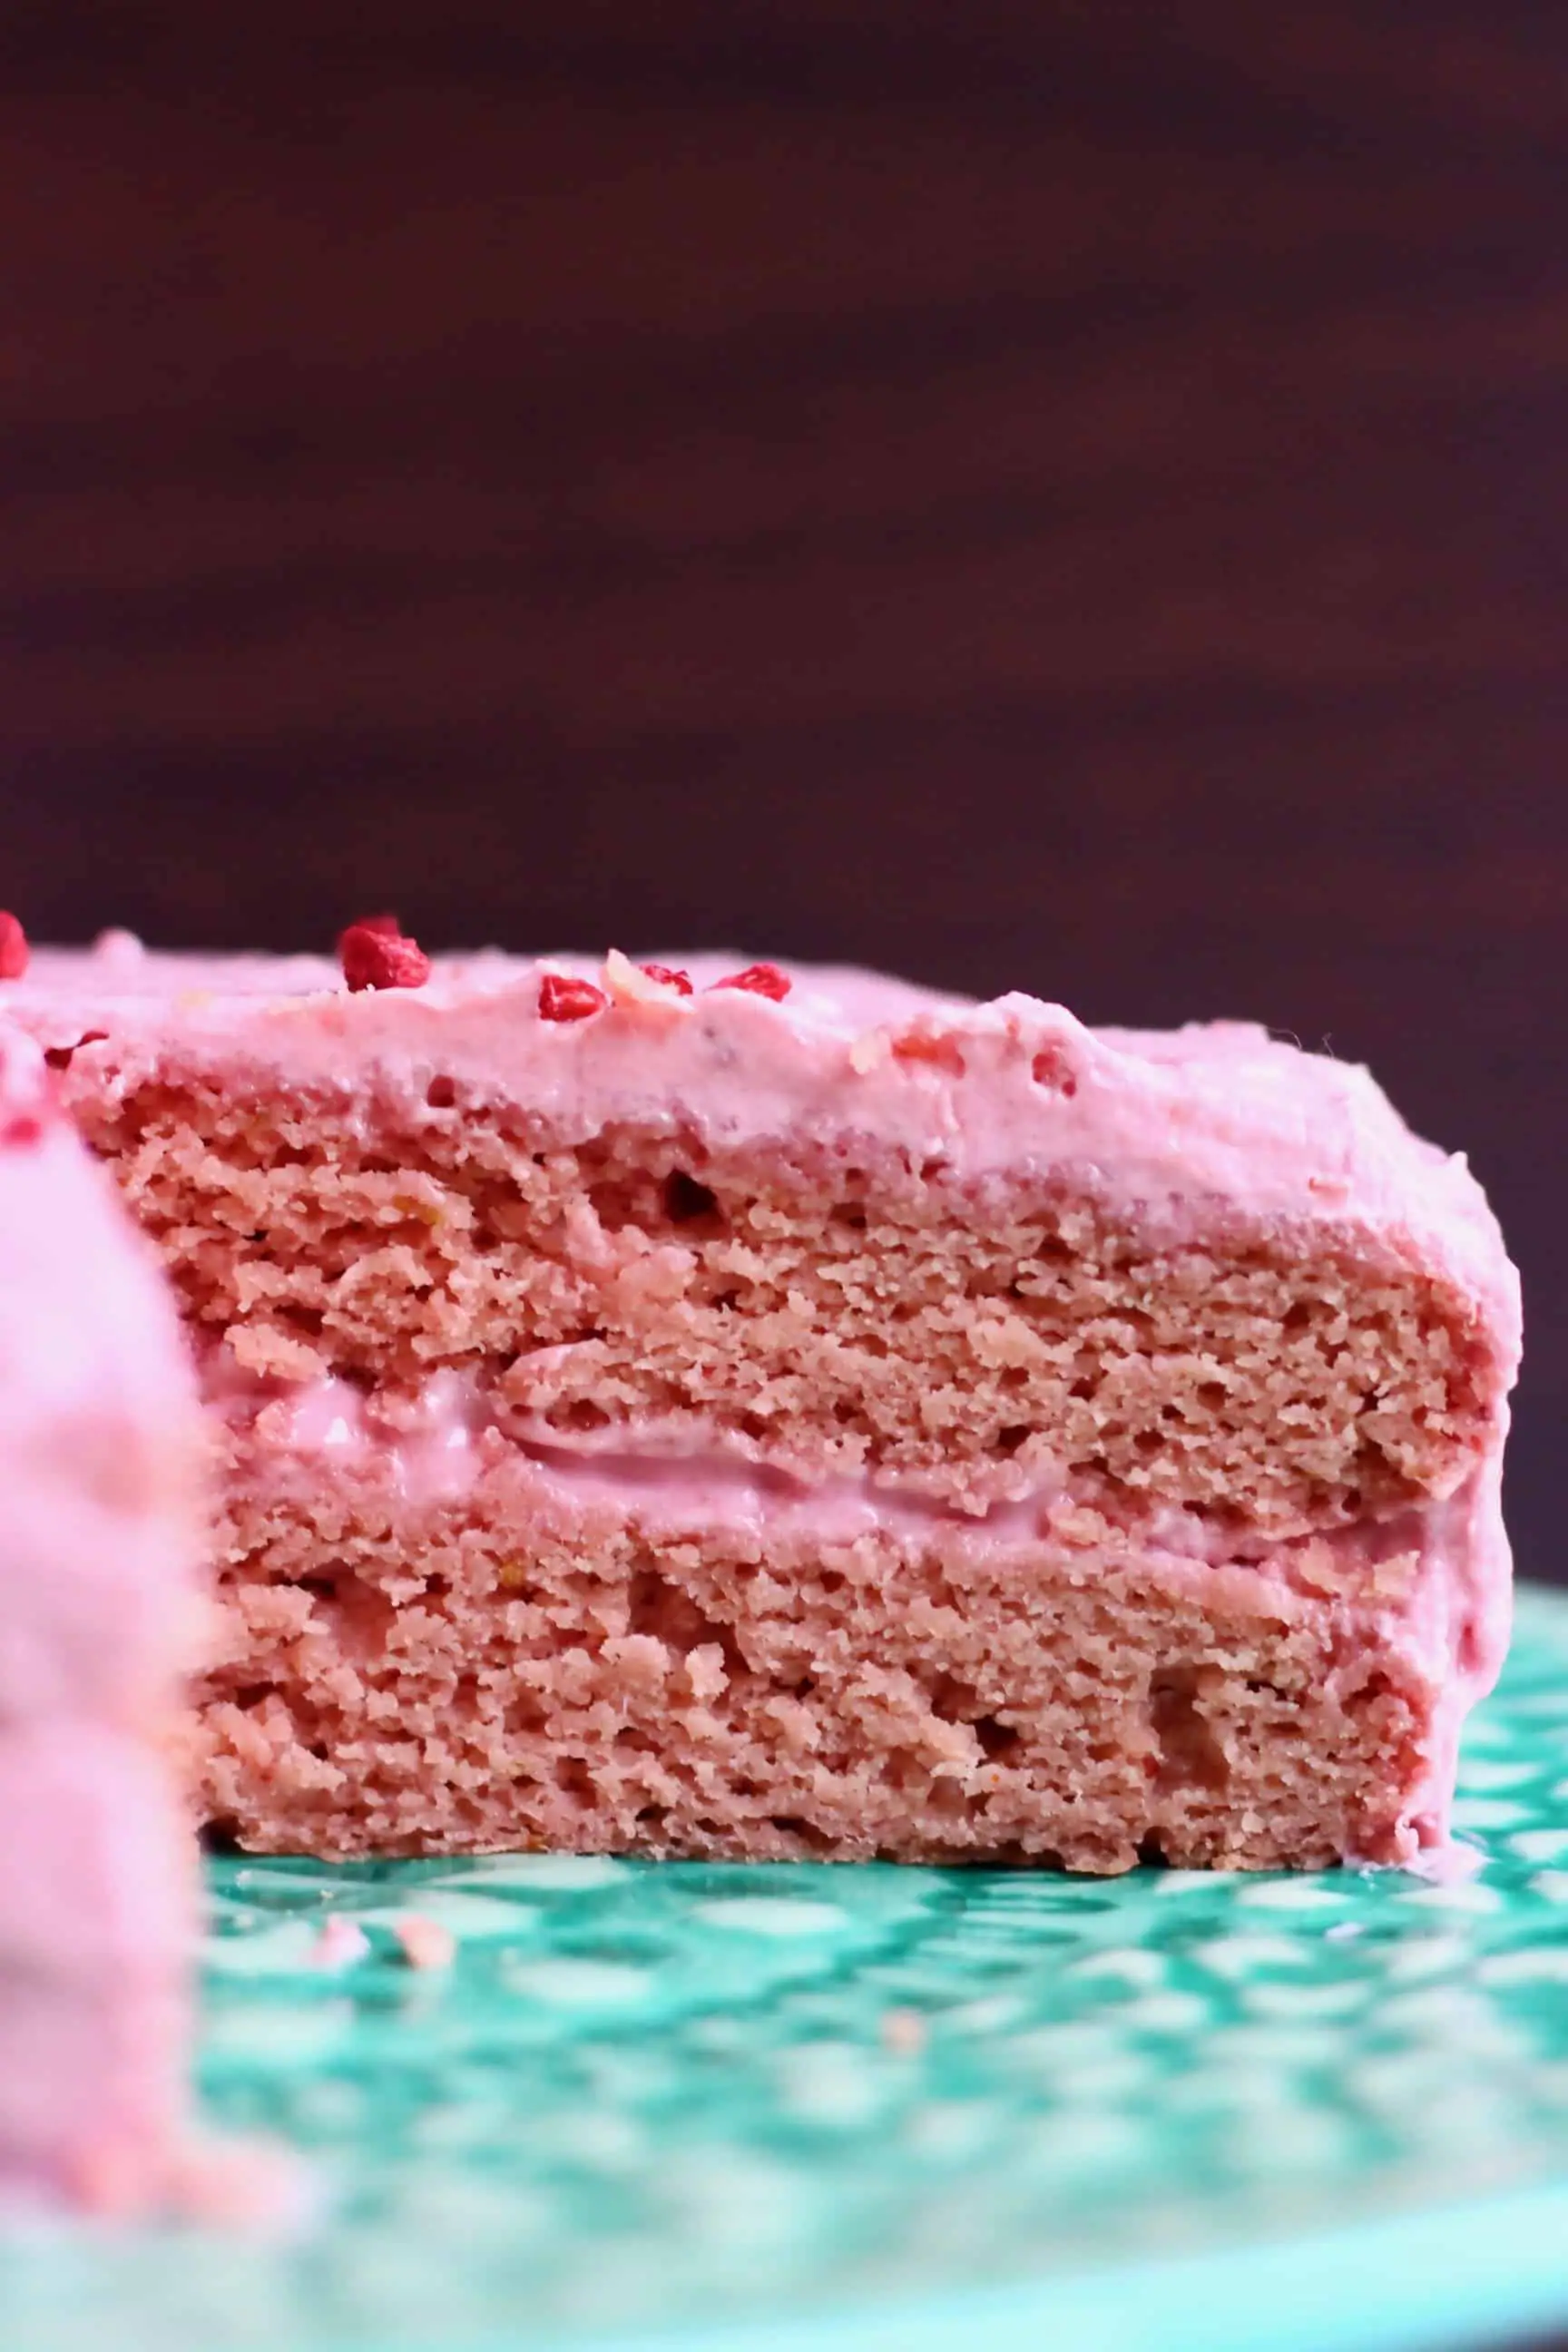 A sliced pink sponge cake with pink frosting on a green cake stand against a dark brown background